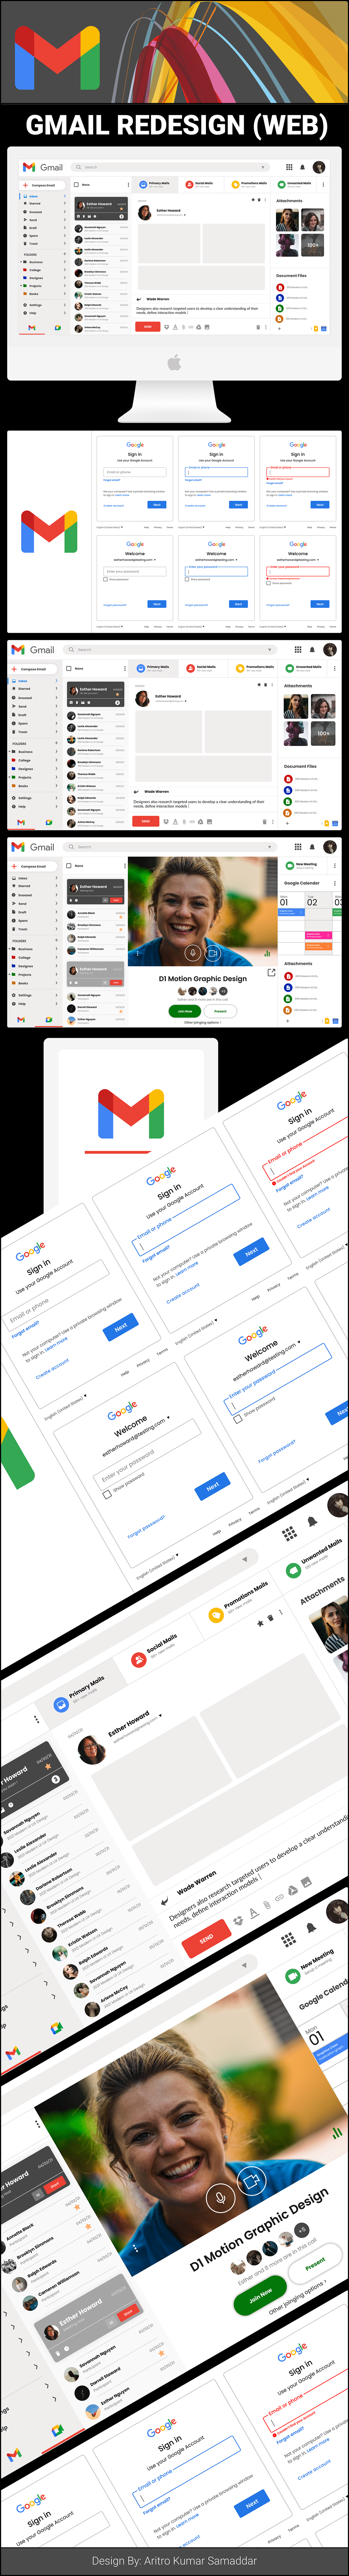 GMAIL(WEB)- GMAIL IS A FREE EMAIL SERVICE DEVELOPED BY GOOGLE (REDESIGN).